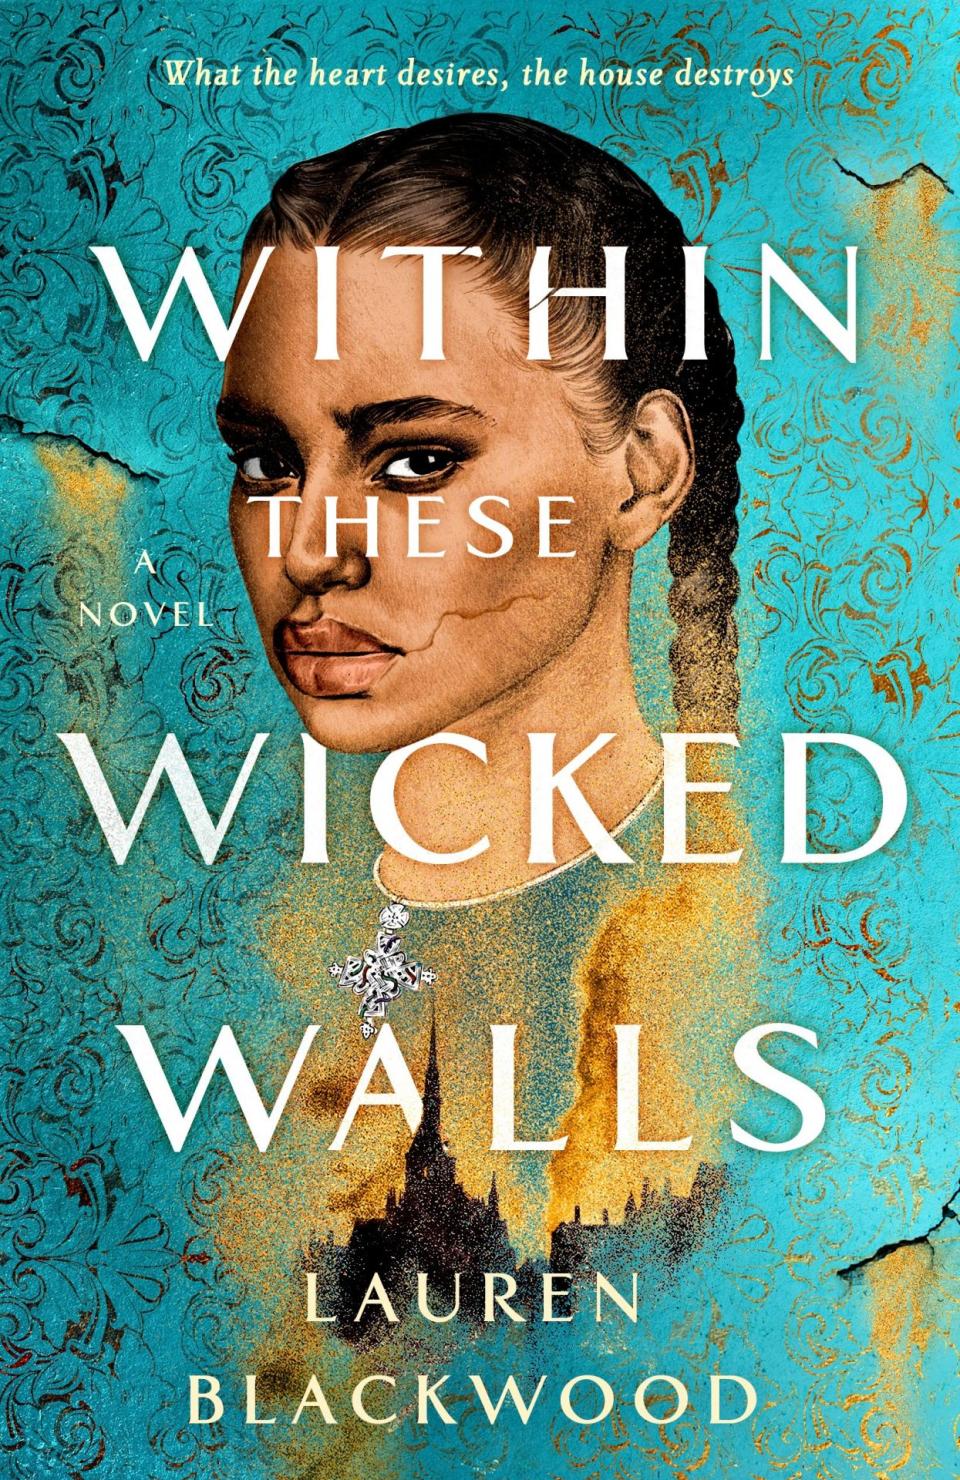 The cover for Within these Wicked Walls shows a young girl looking out to the reader with a serious expression a scary building lurks beneath her face